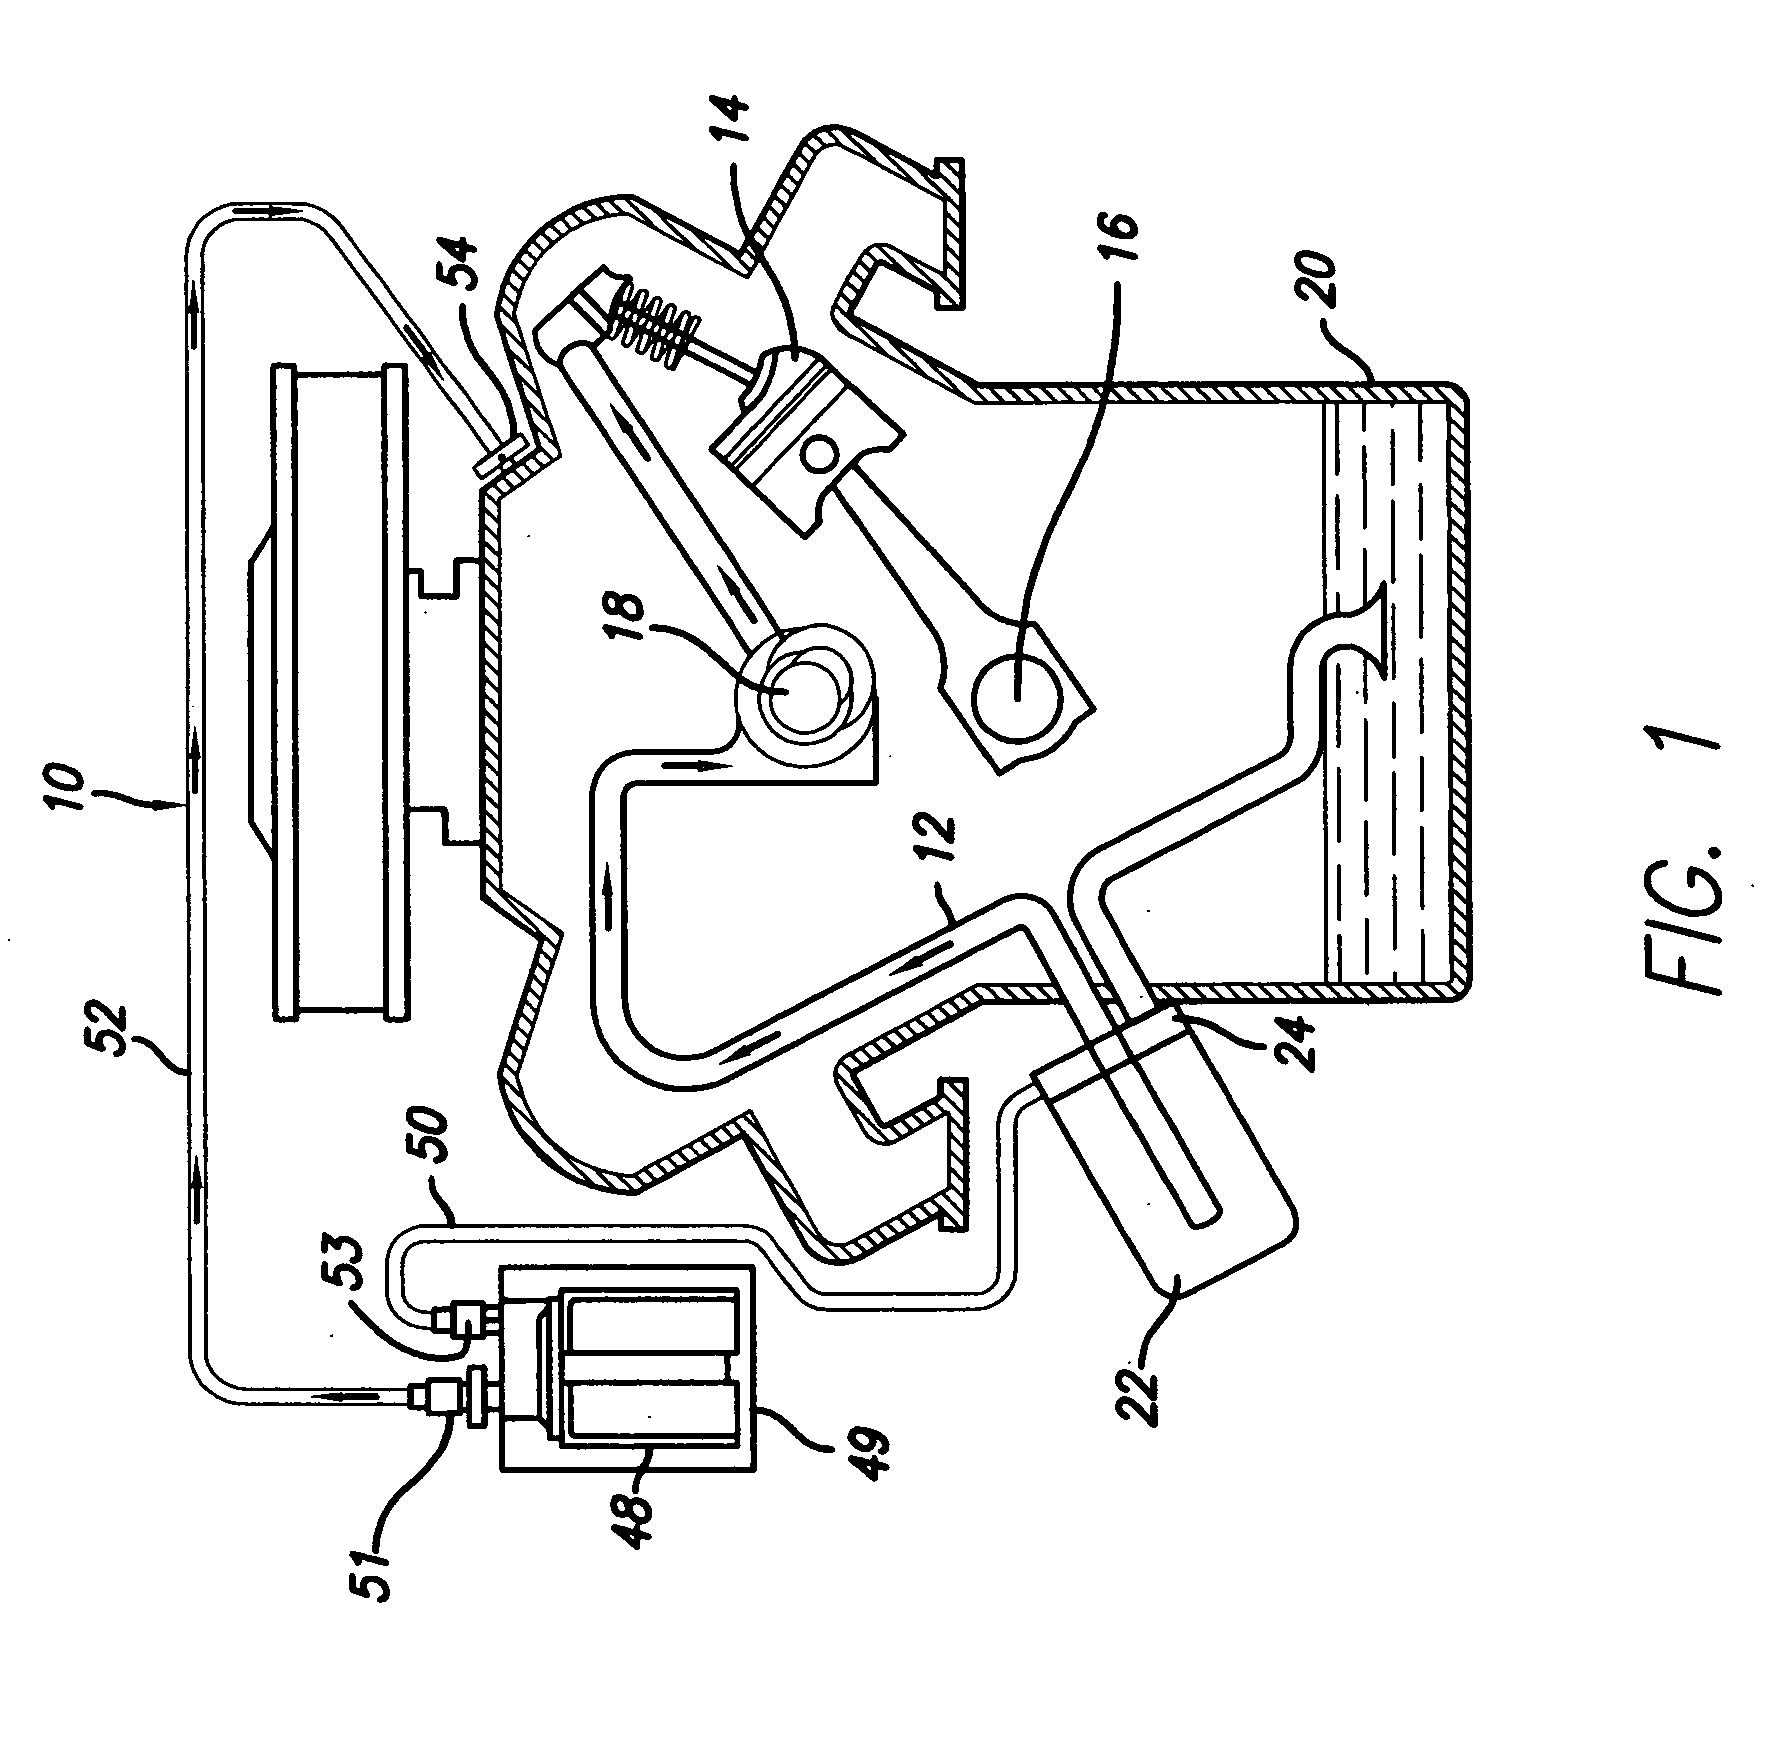 Bypass oil filter system and method of installing same